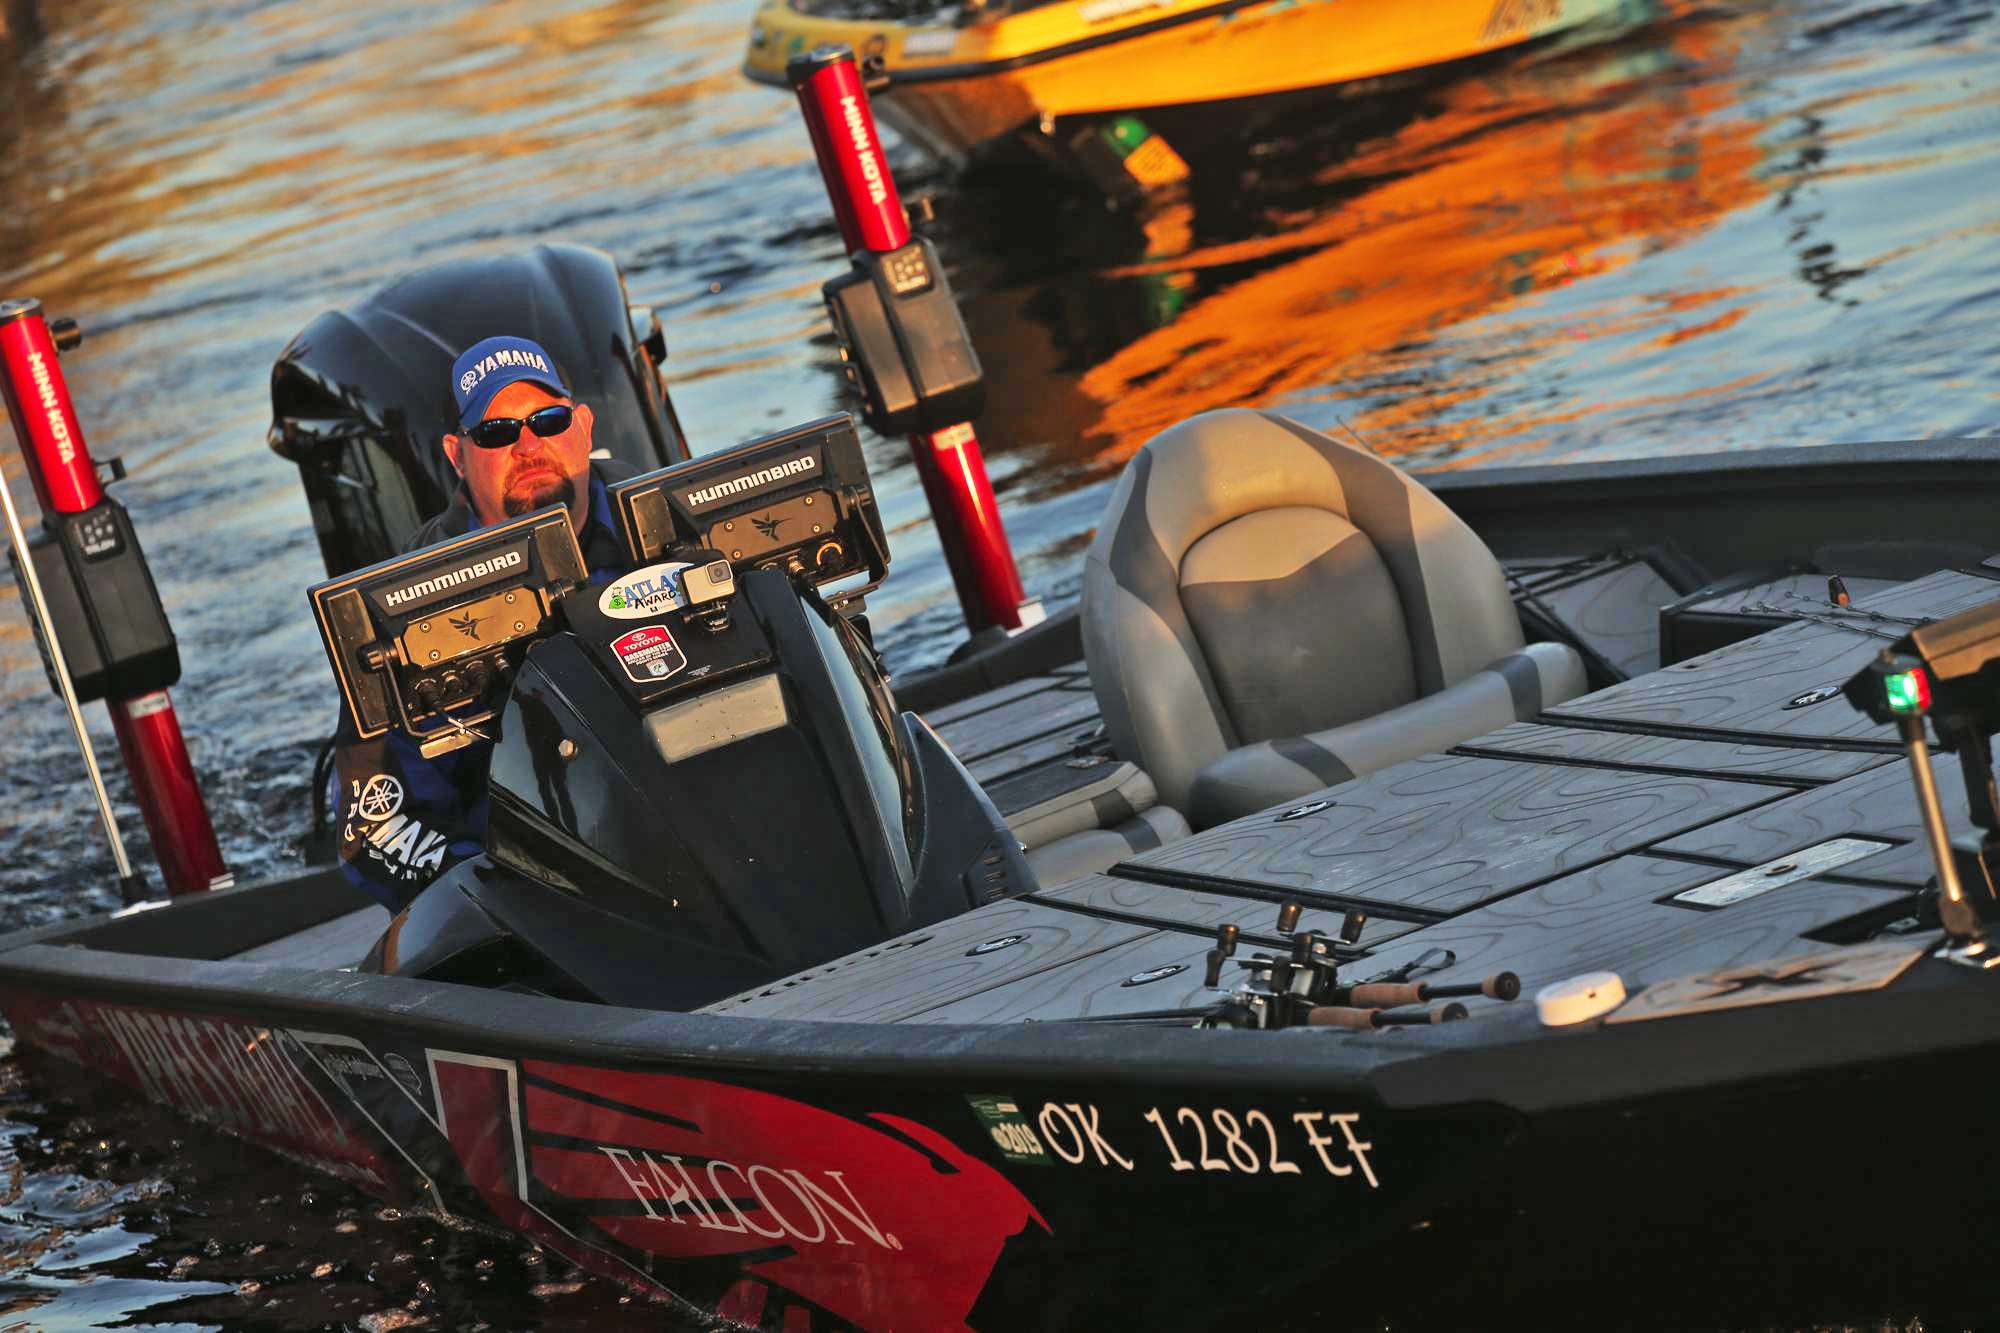 Dale Hightower dreamed his whole life of competing in the Bassmaster Classic, and he finally got his chance in 2011 when he was one of 50 anglers that battled on the Louisiana Delta on the sportâs biggest stage. <p> Hightower qualified for the Classic through the B.A.S.S. Federation and he more than held his own, finishing 15th against a field filled with seasoned veterans. The Mannford, Okla. resident was in sixth place after Day 1 of that tournament, but severe fog hurt his chances, along with the rest of the anglers making the long run from New Orleansâ West Bank all the way to Venice at the mouth of the Mississippi River. <p> Despite that, the 44-year-old Hightower has almost nothing but positive memories from his one and only Classic appearance. The only thing that would compare, he said, would be to fish in the 2020 Classic â something he can do if he performs well on the 2019 Bassmaster Elite Series. Awaiting that, here are Hightowerâs 5 favorite memories from the 2011 Bassmaster Classic.